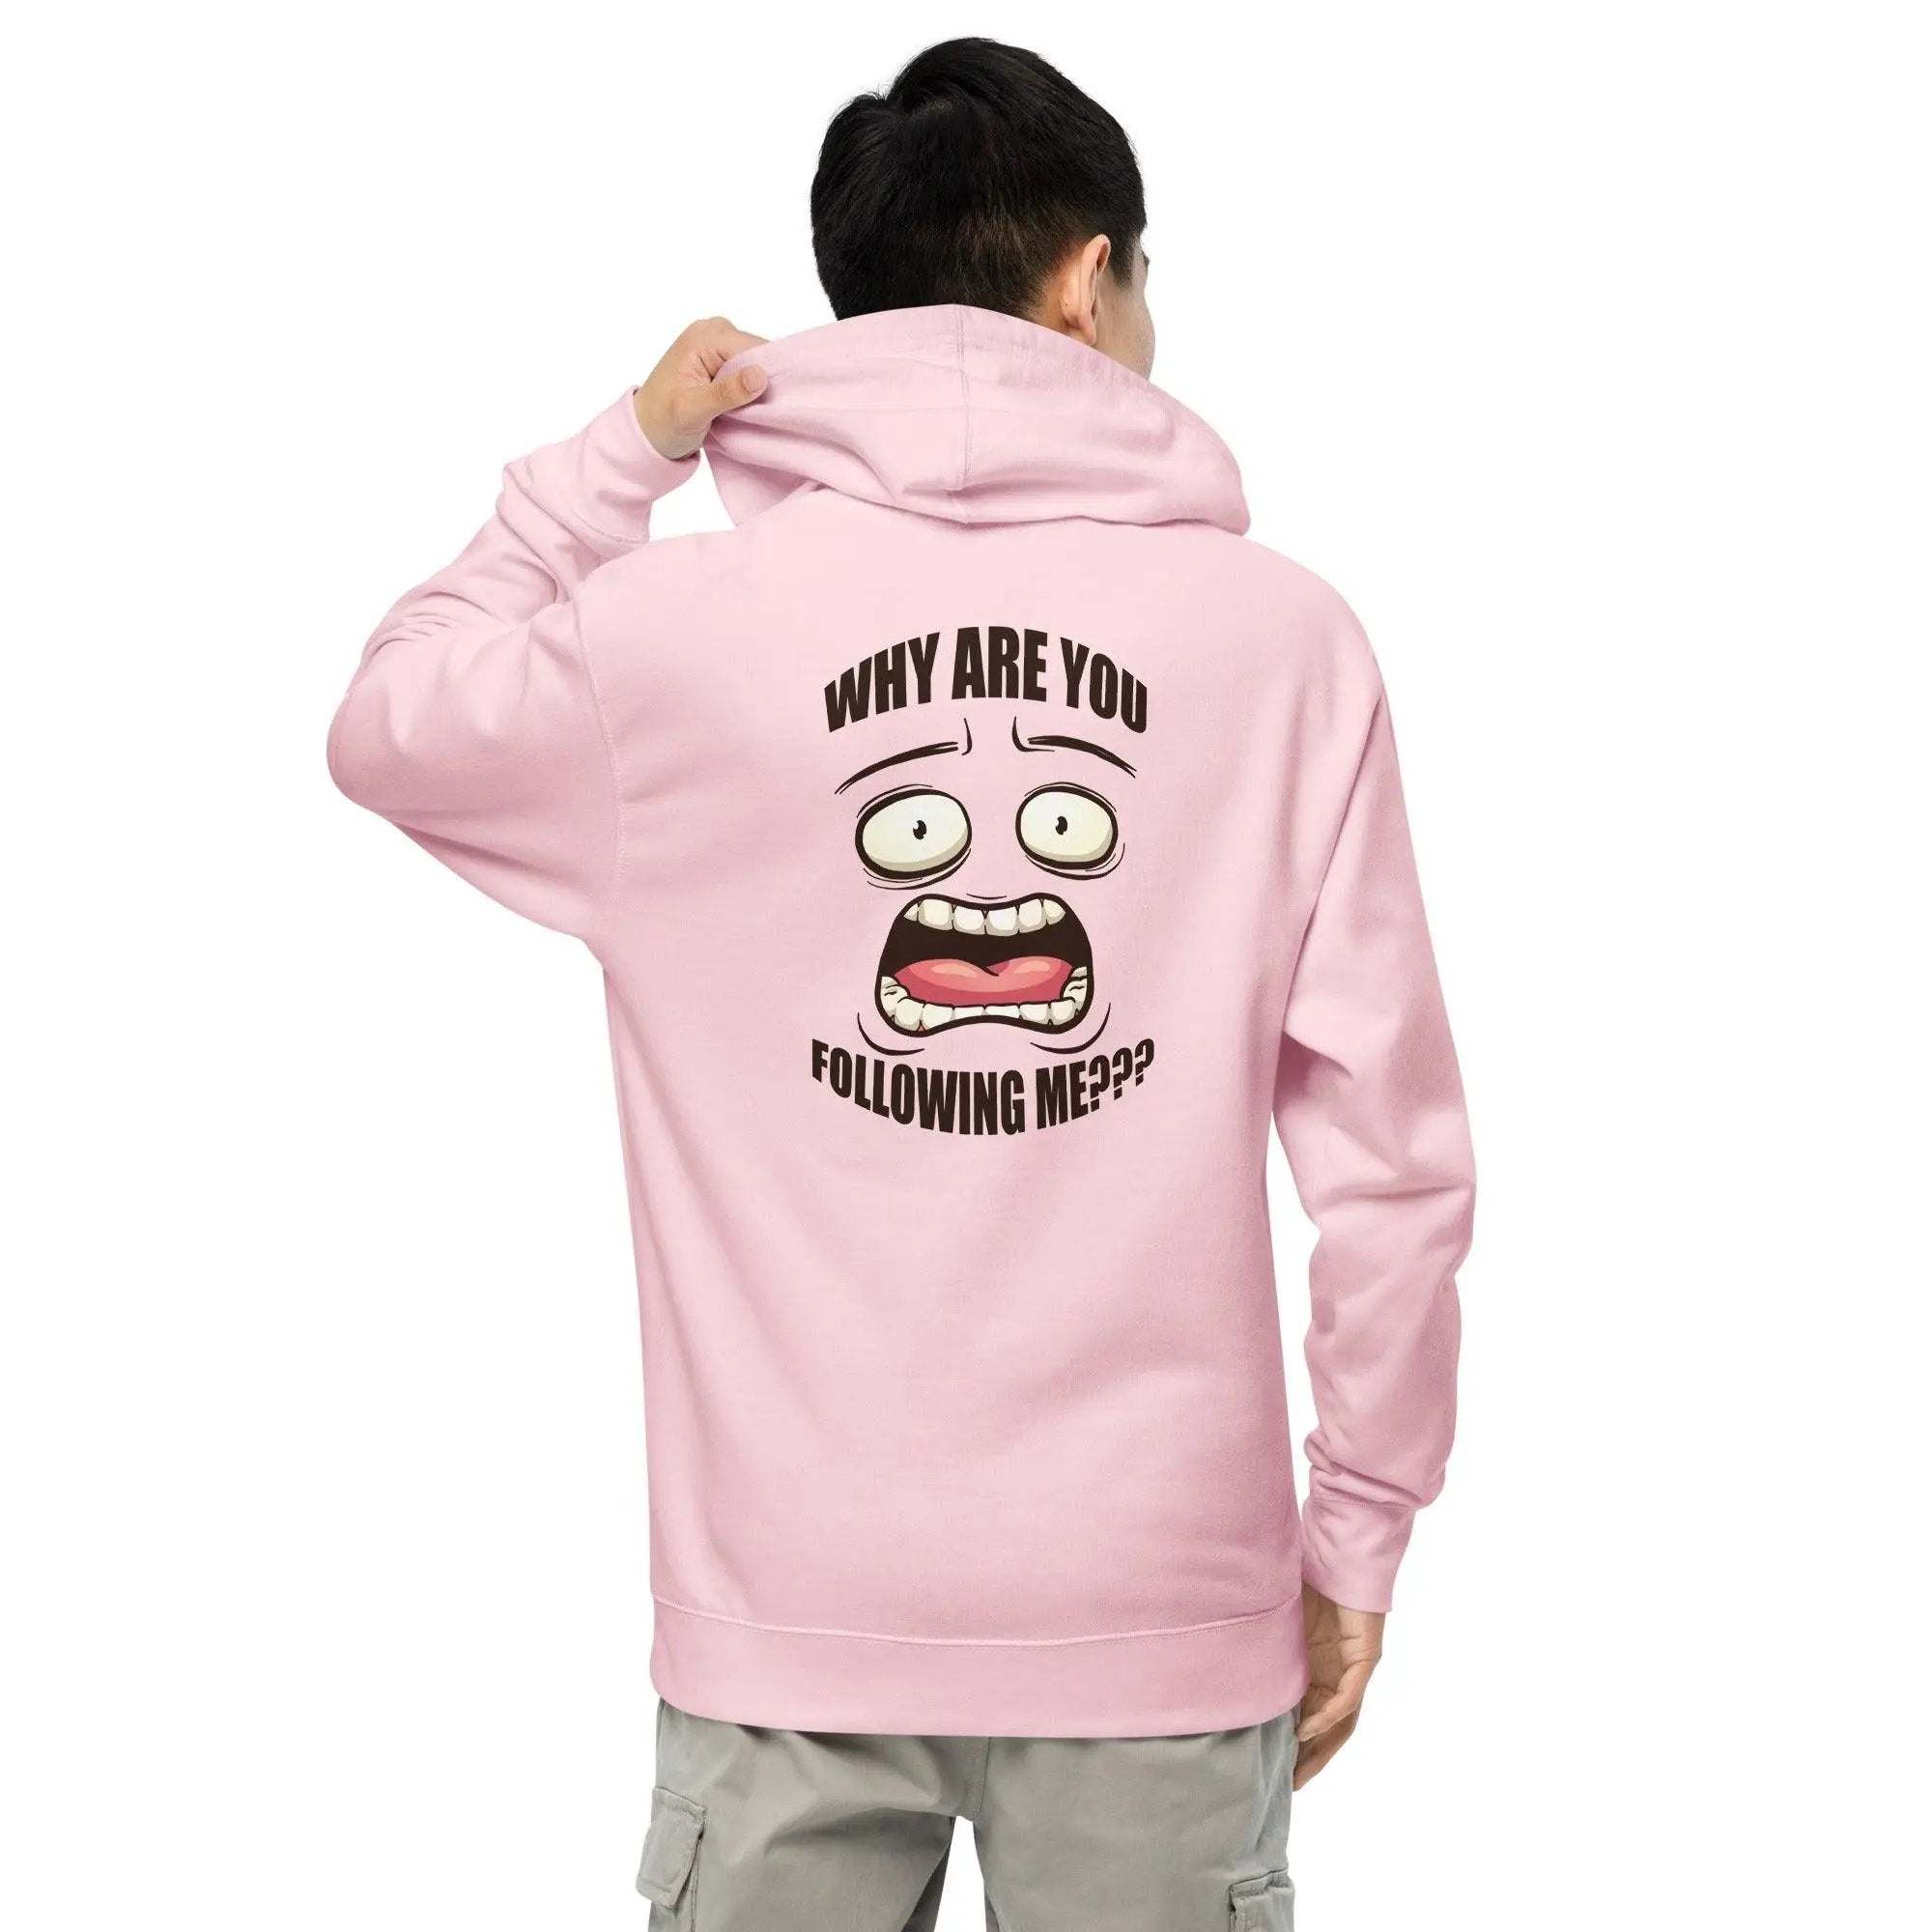 Why Are You Following Me? Unisex midweight hoodie